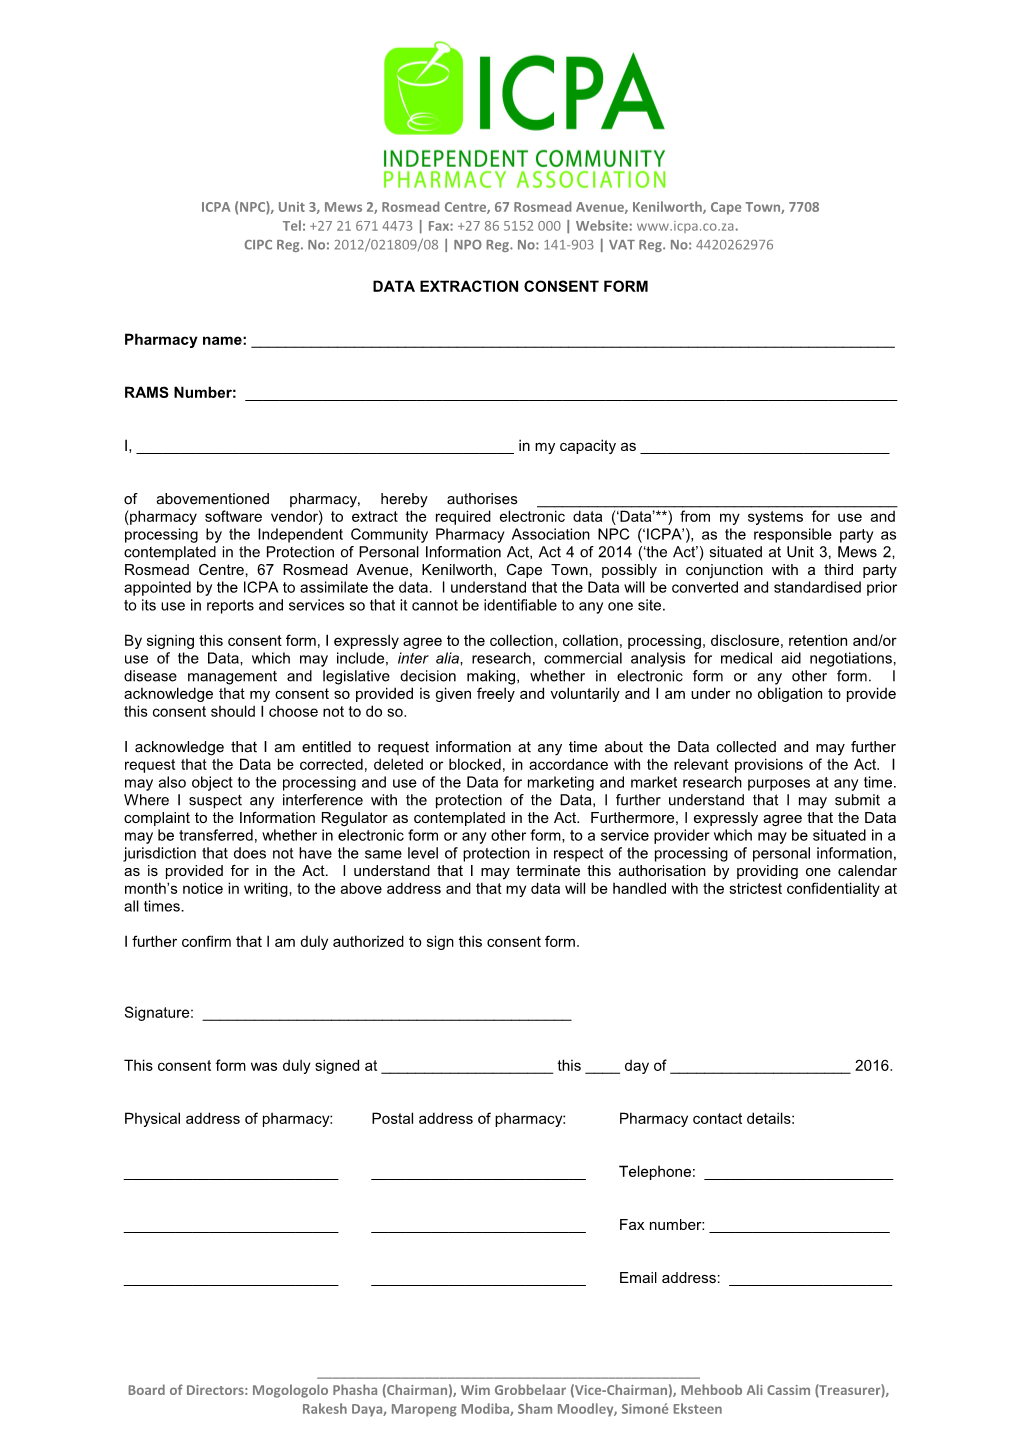 Data Extraction Consent Form